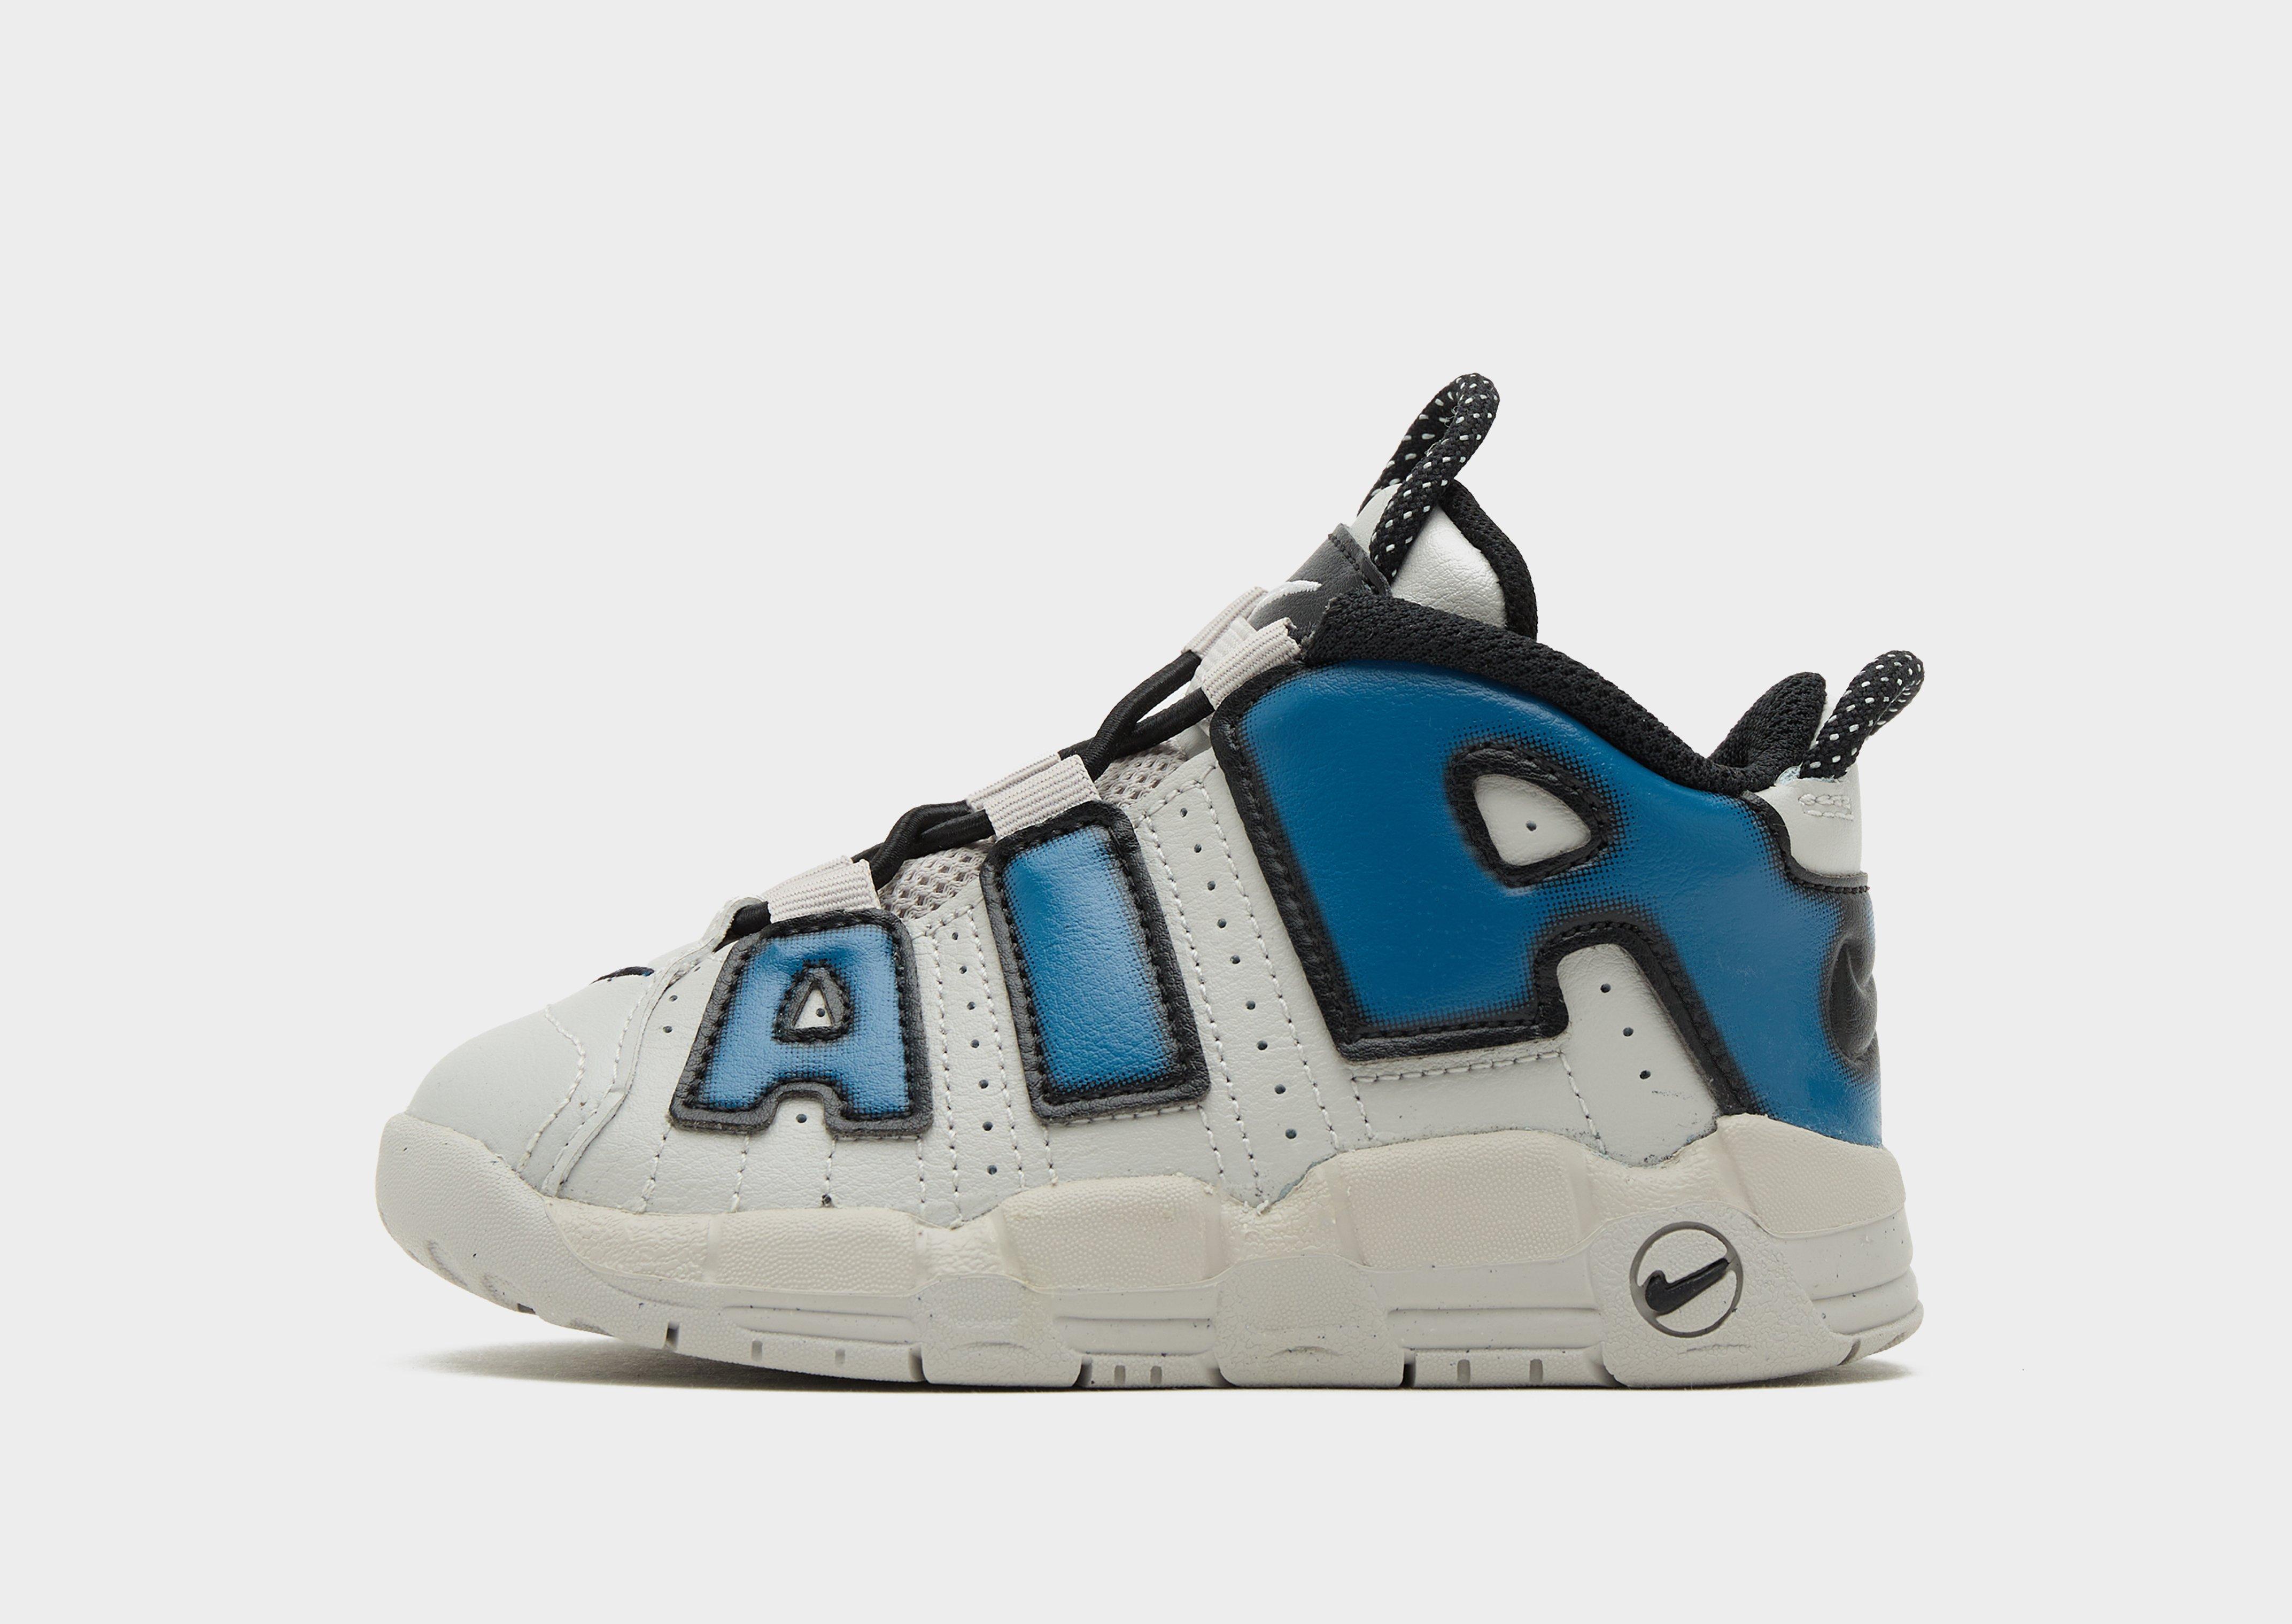 Grey Nike Air More Uptempo 96 Infant | JD Sports Global - JD